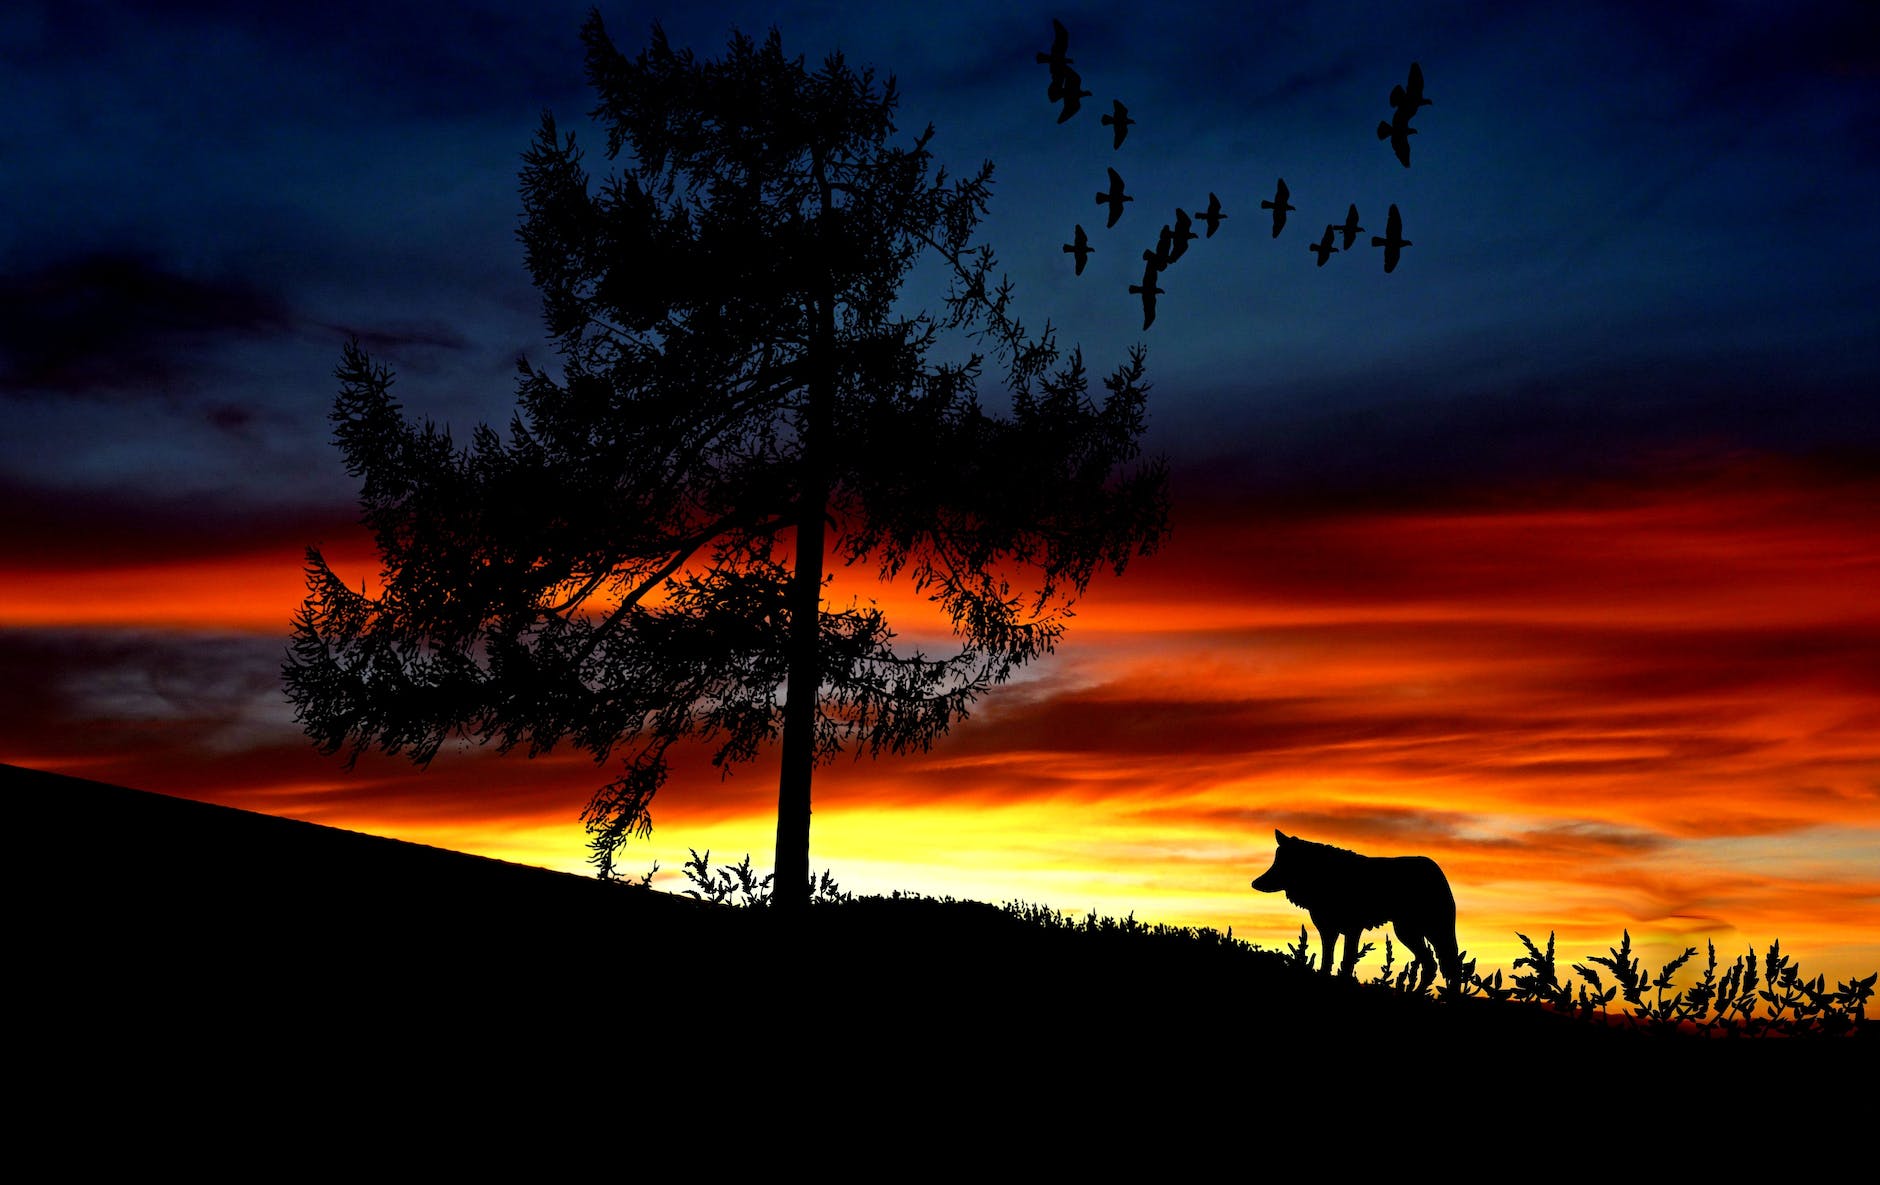 silhouette dog on landscape against romantic sky at sunset